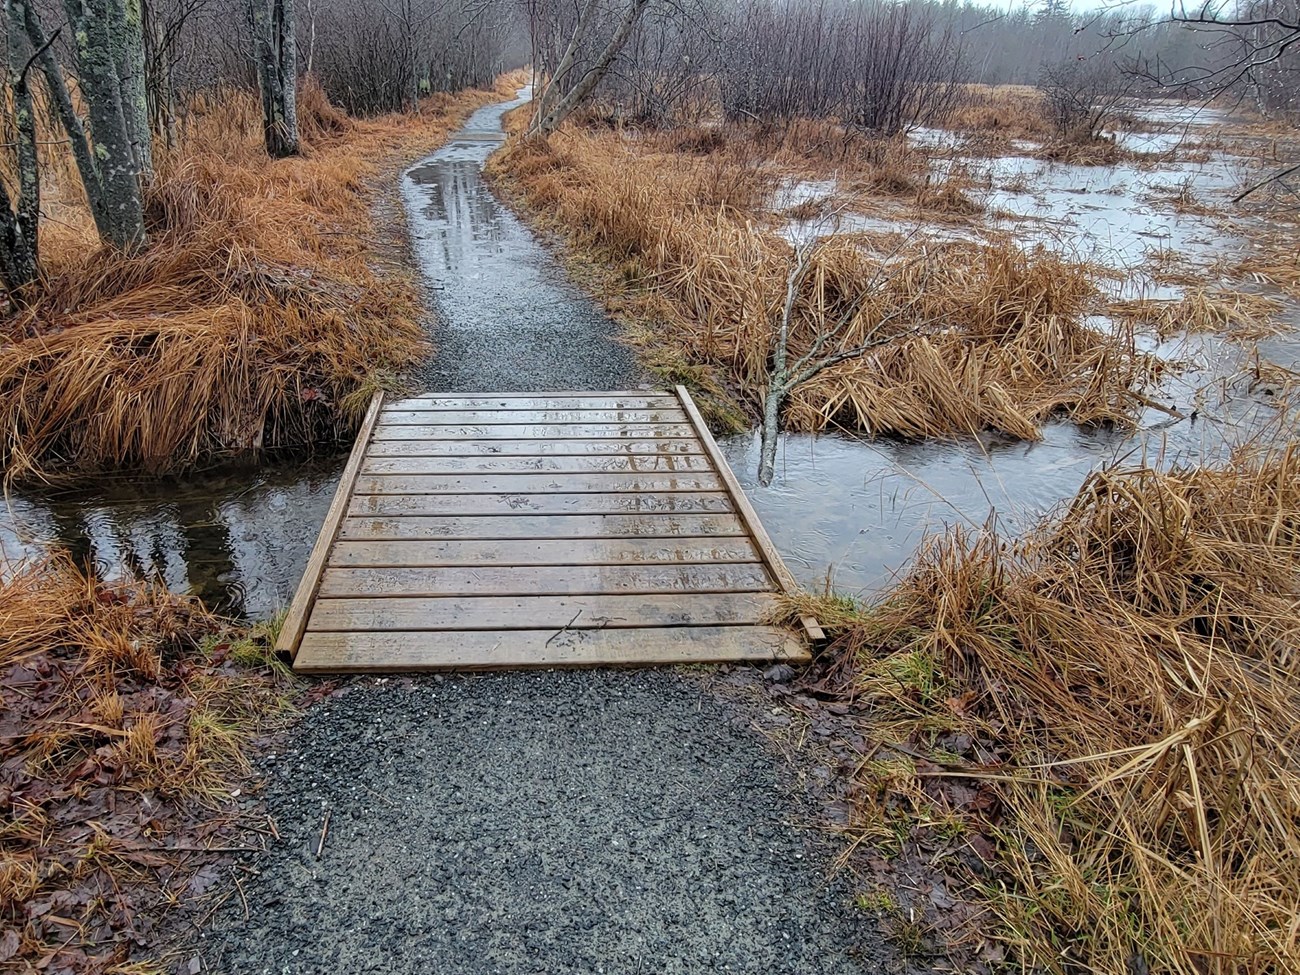 water spills over a gravel trail making it impassable